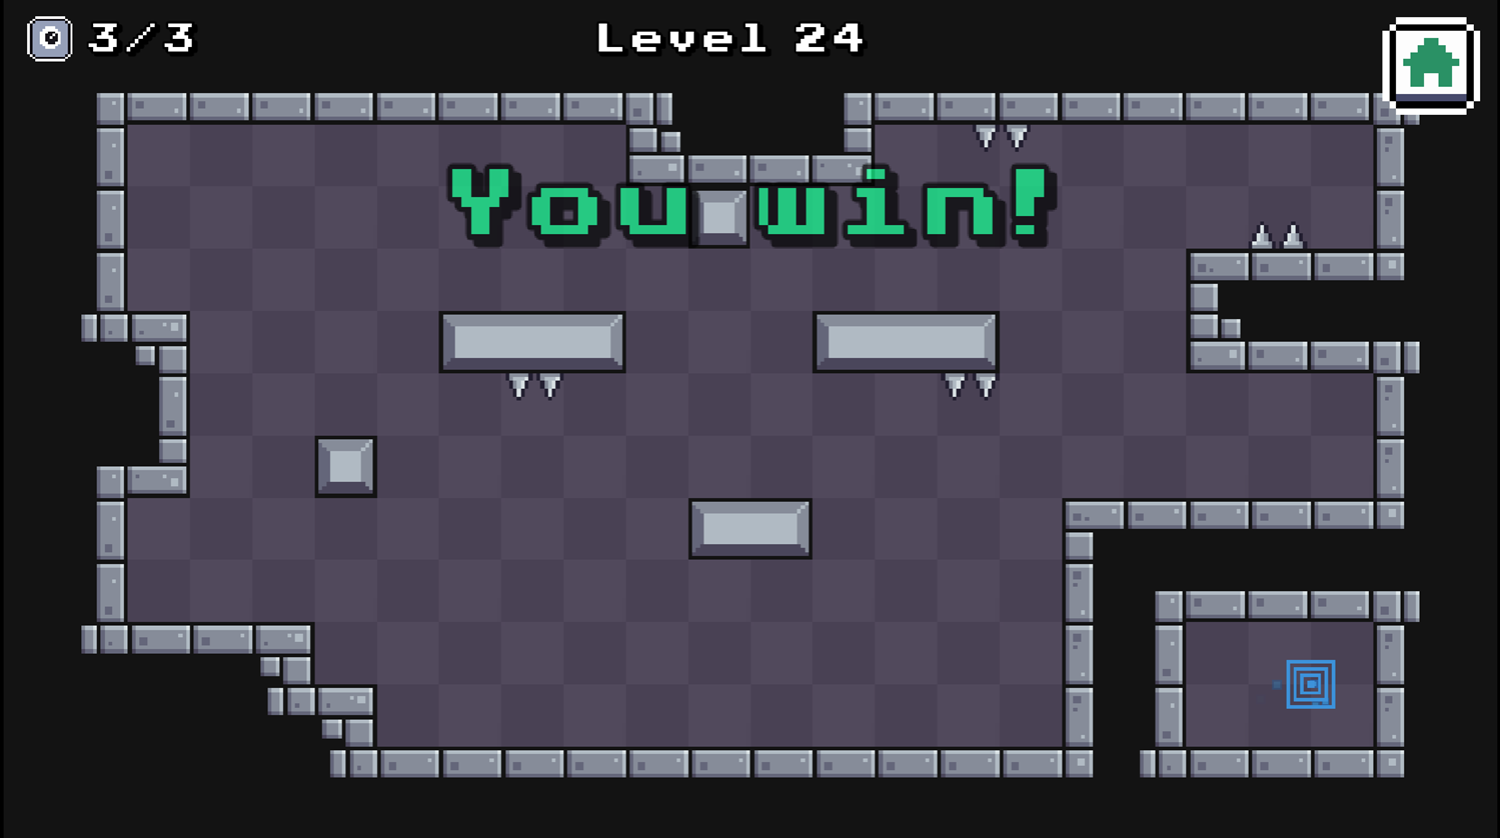 Square Monsters Game Level Beat Screenshot.